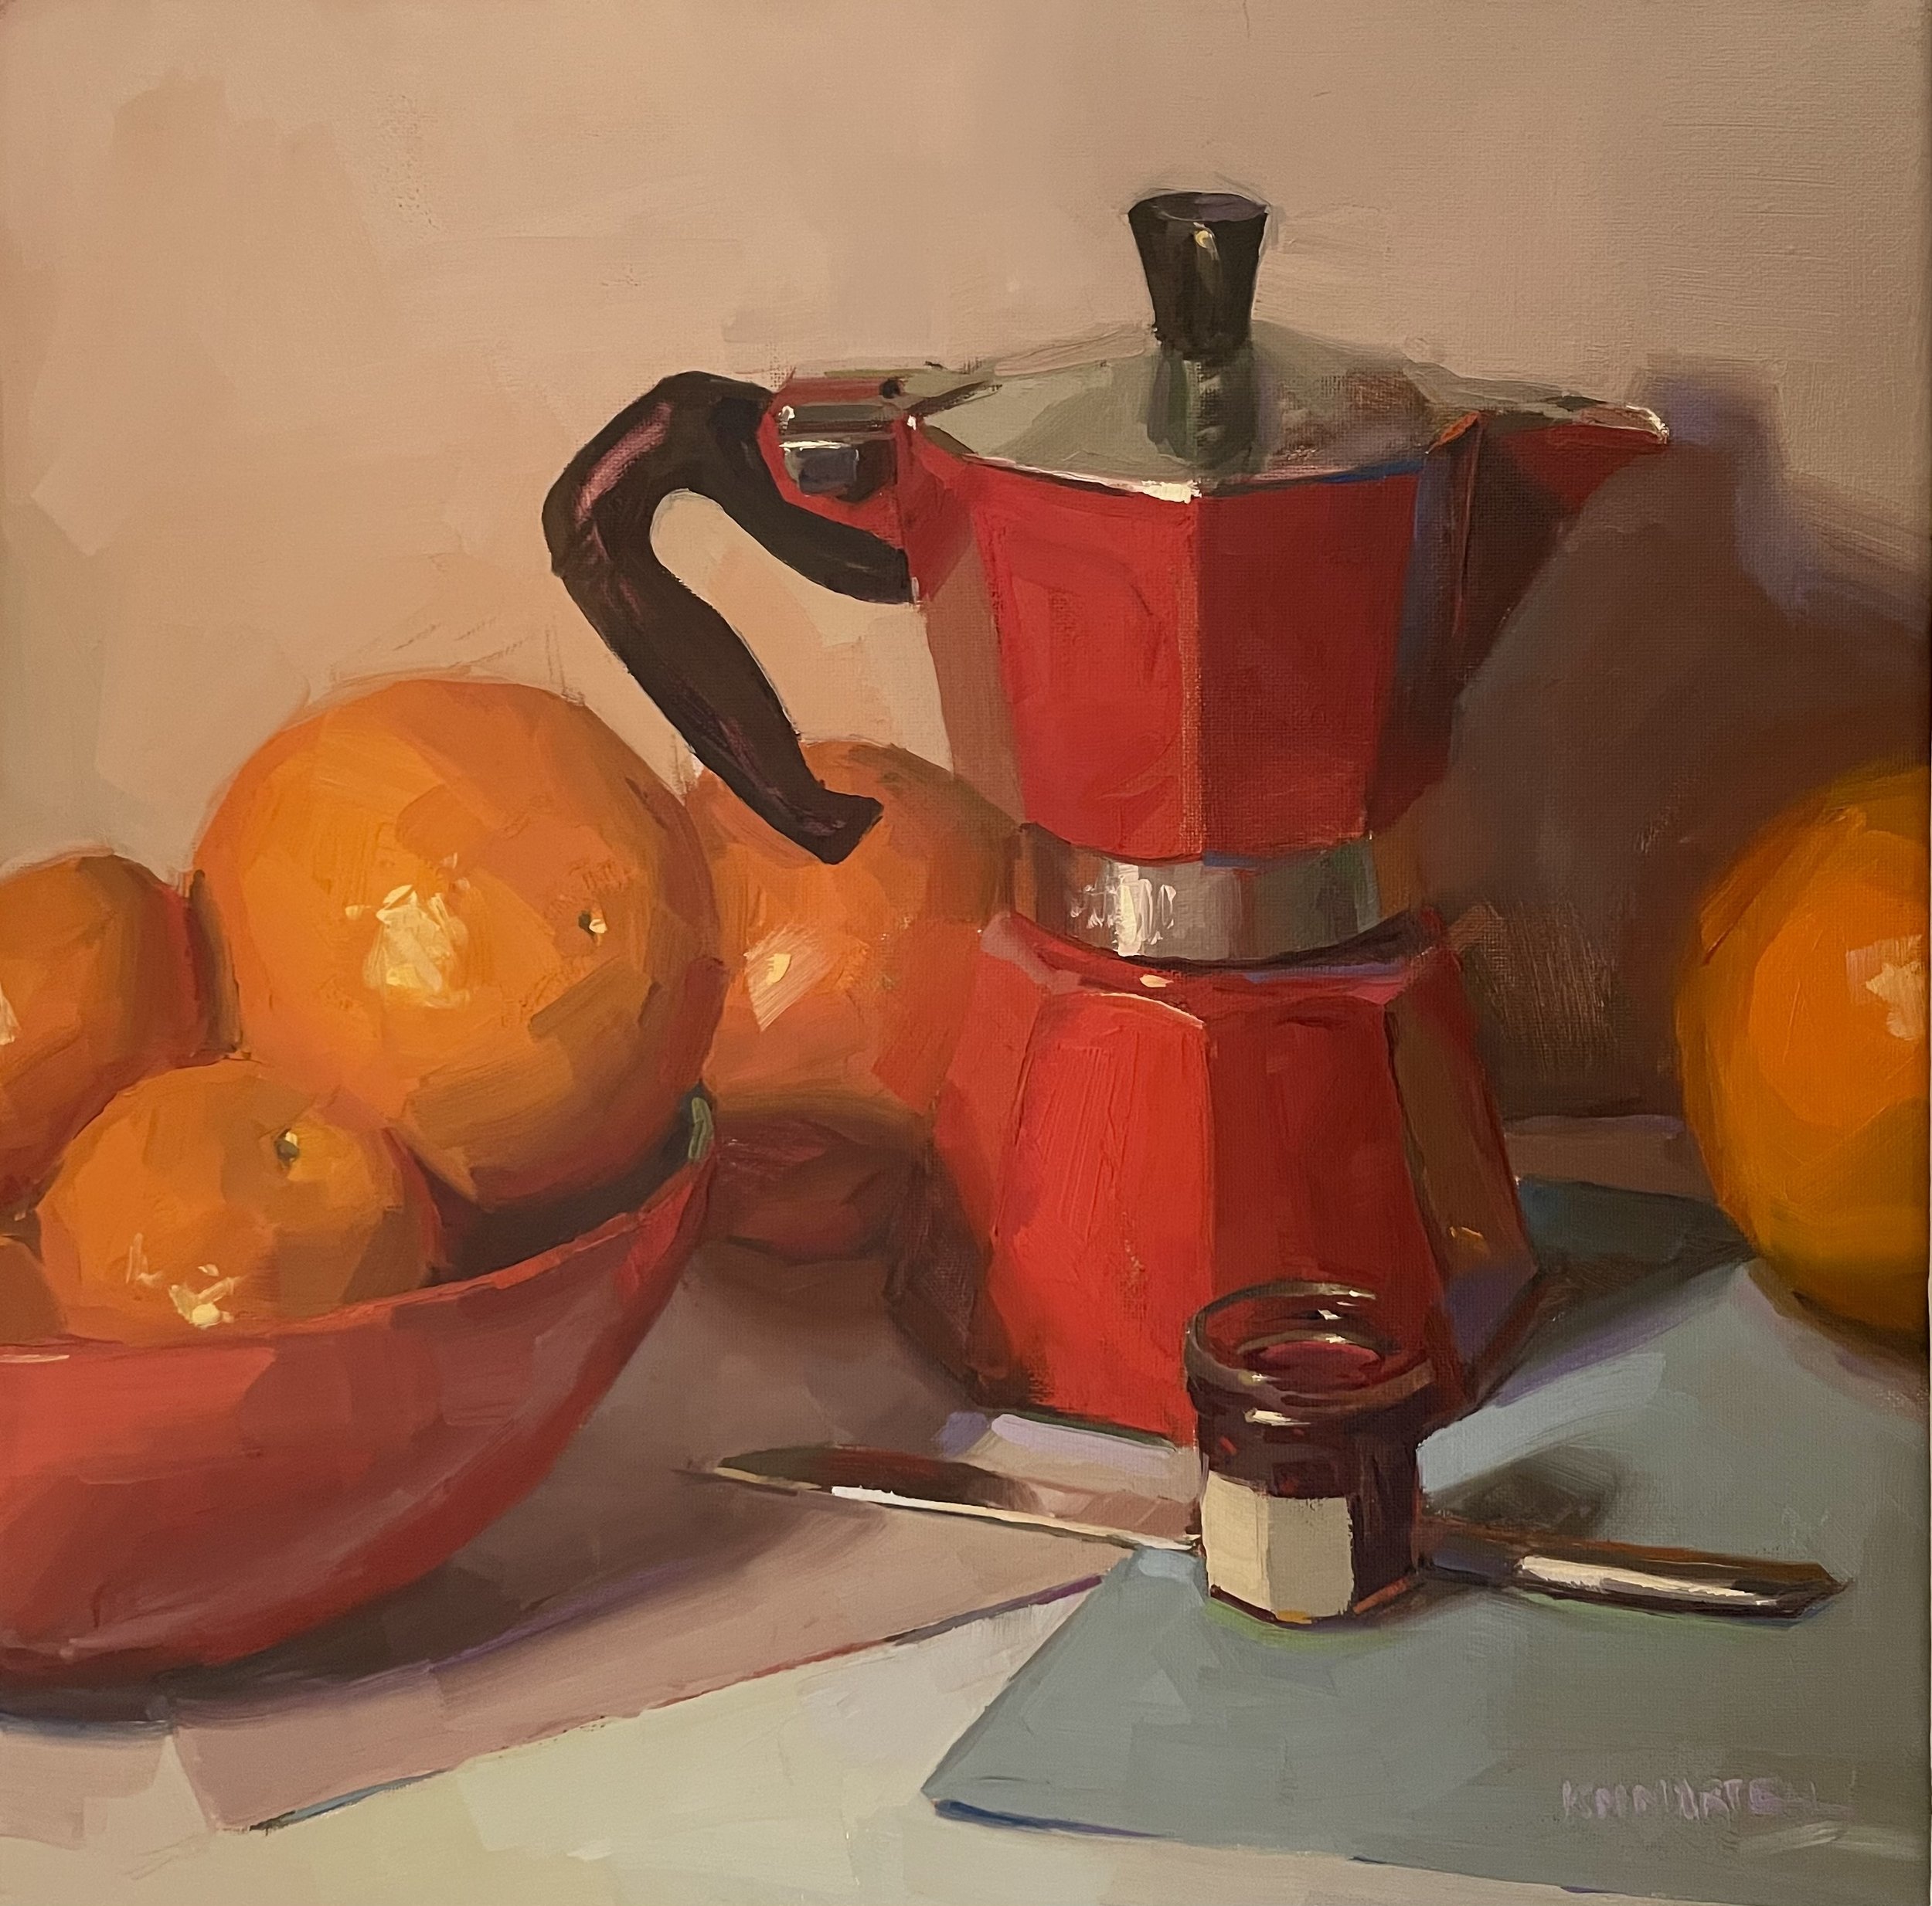 And in the morning - 12x12in-oil on canvas - KMMARTELL - 2022.jpeg